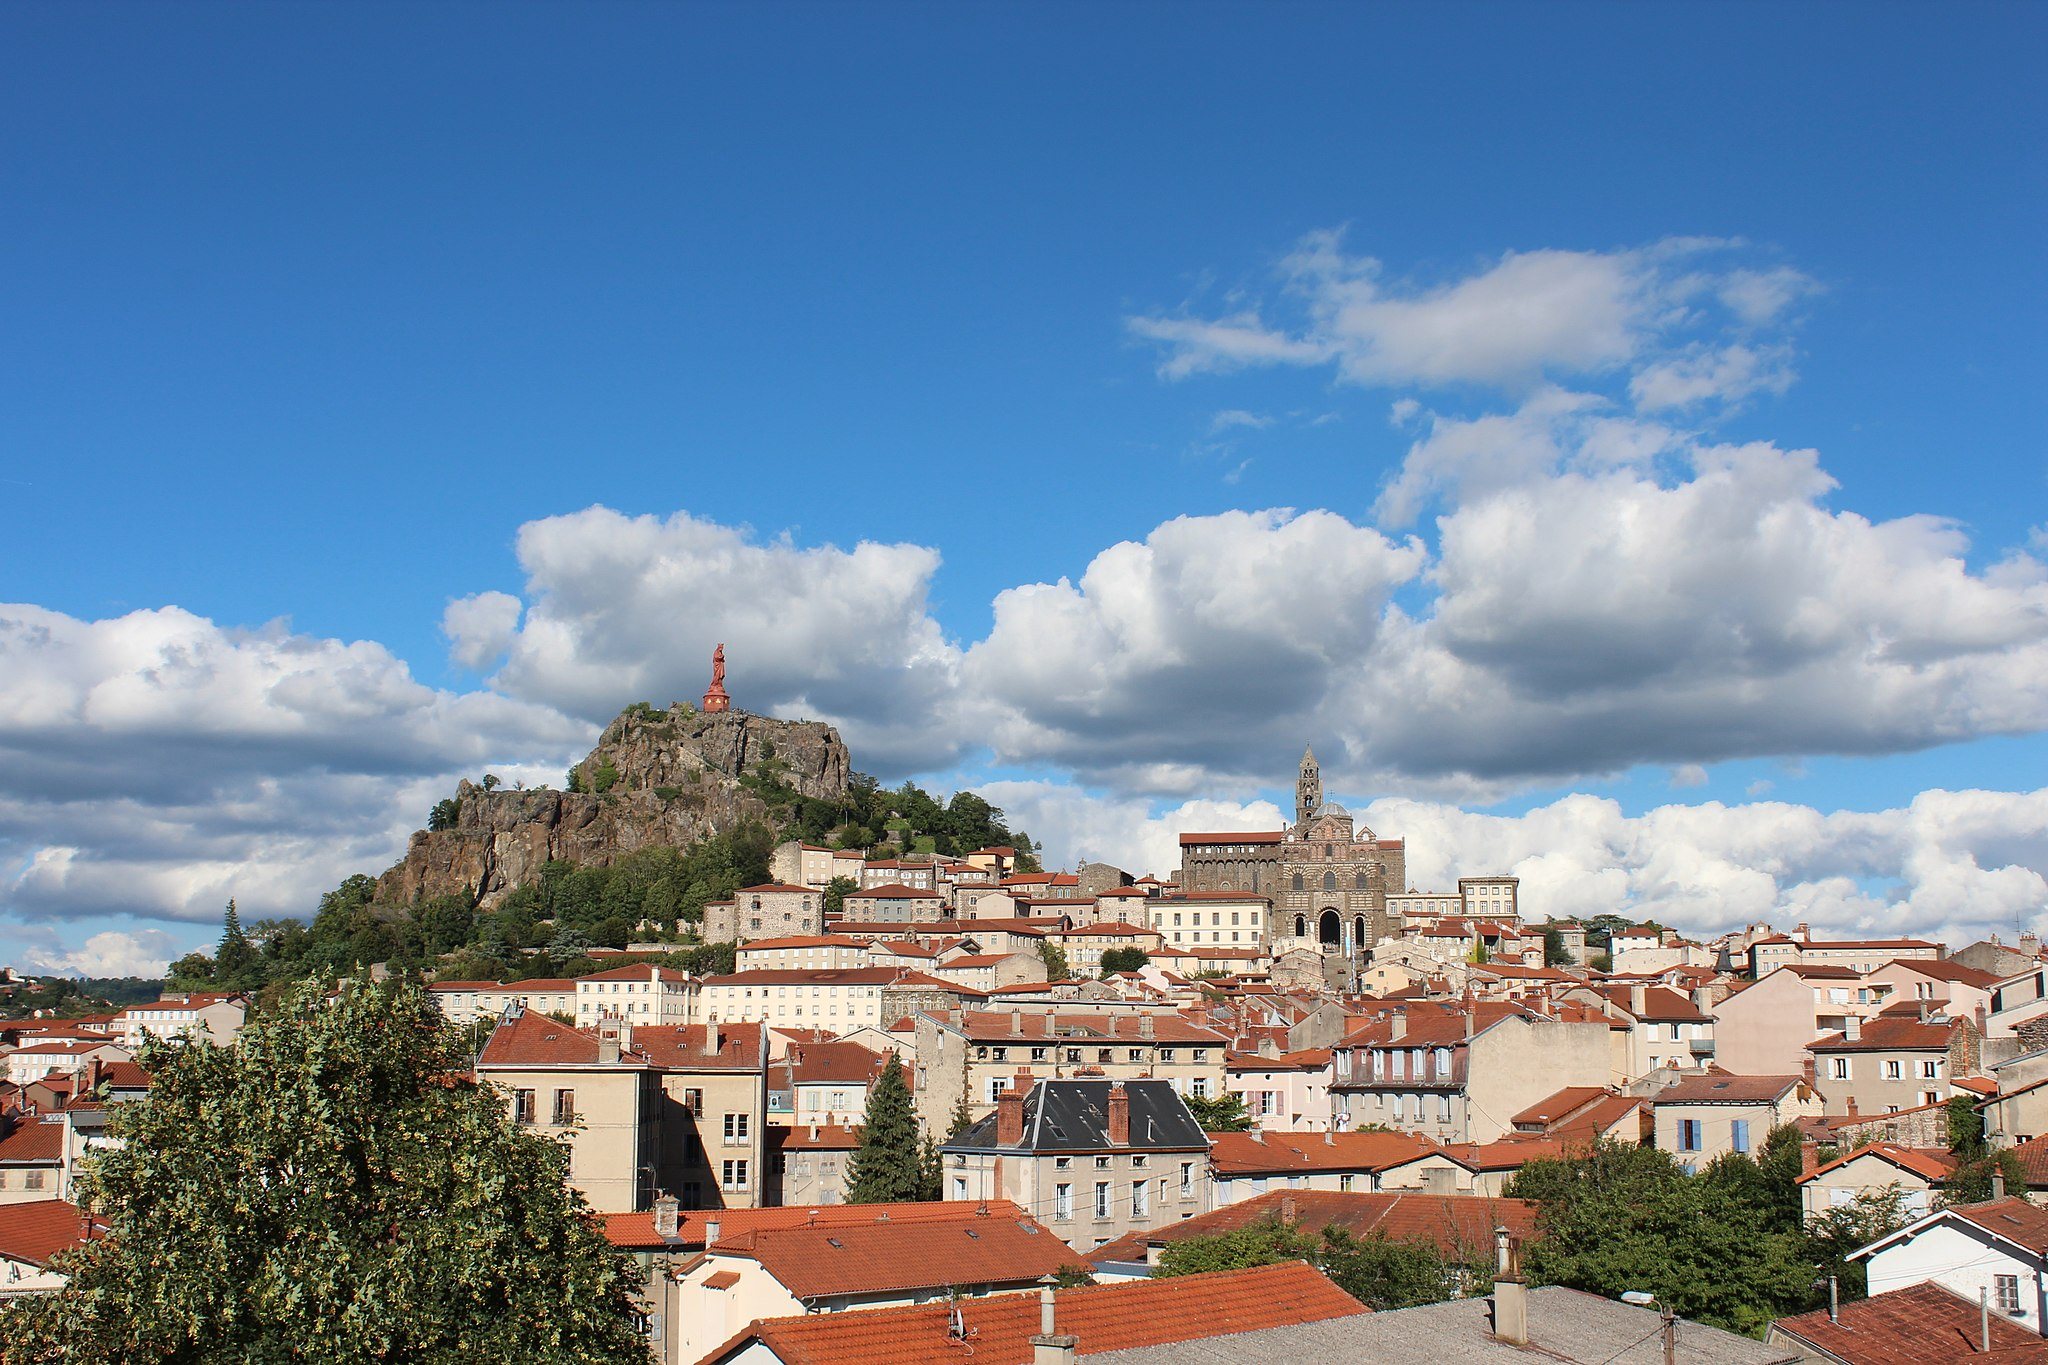 Town of Le Puy en Velay, France, where author did his WWOOF volunteer work.